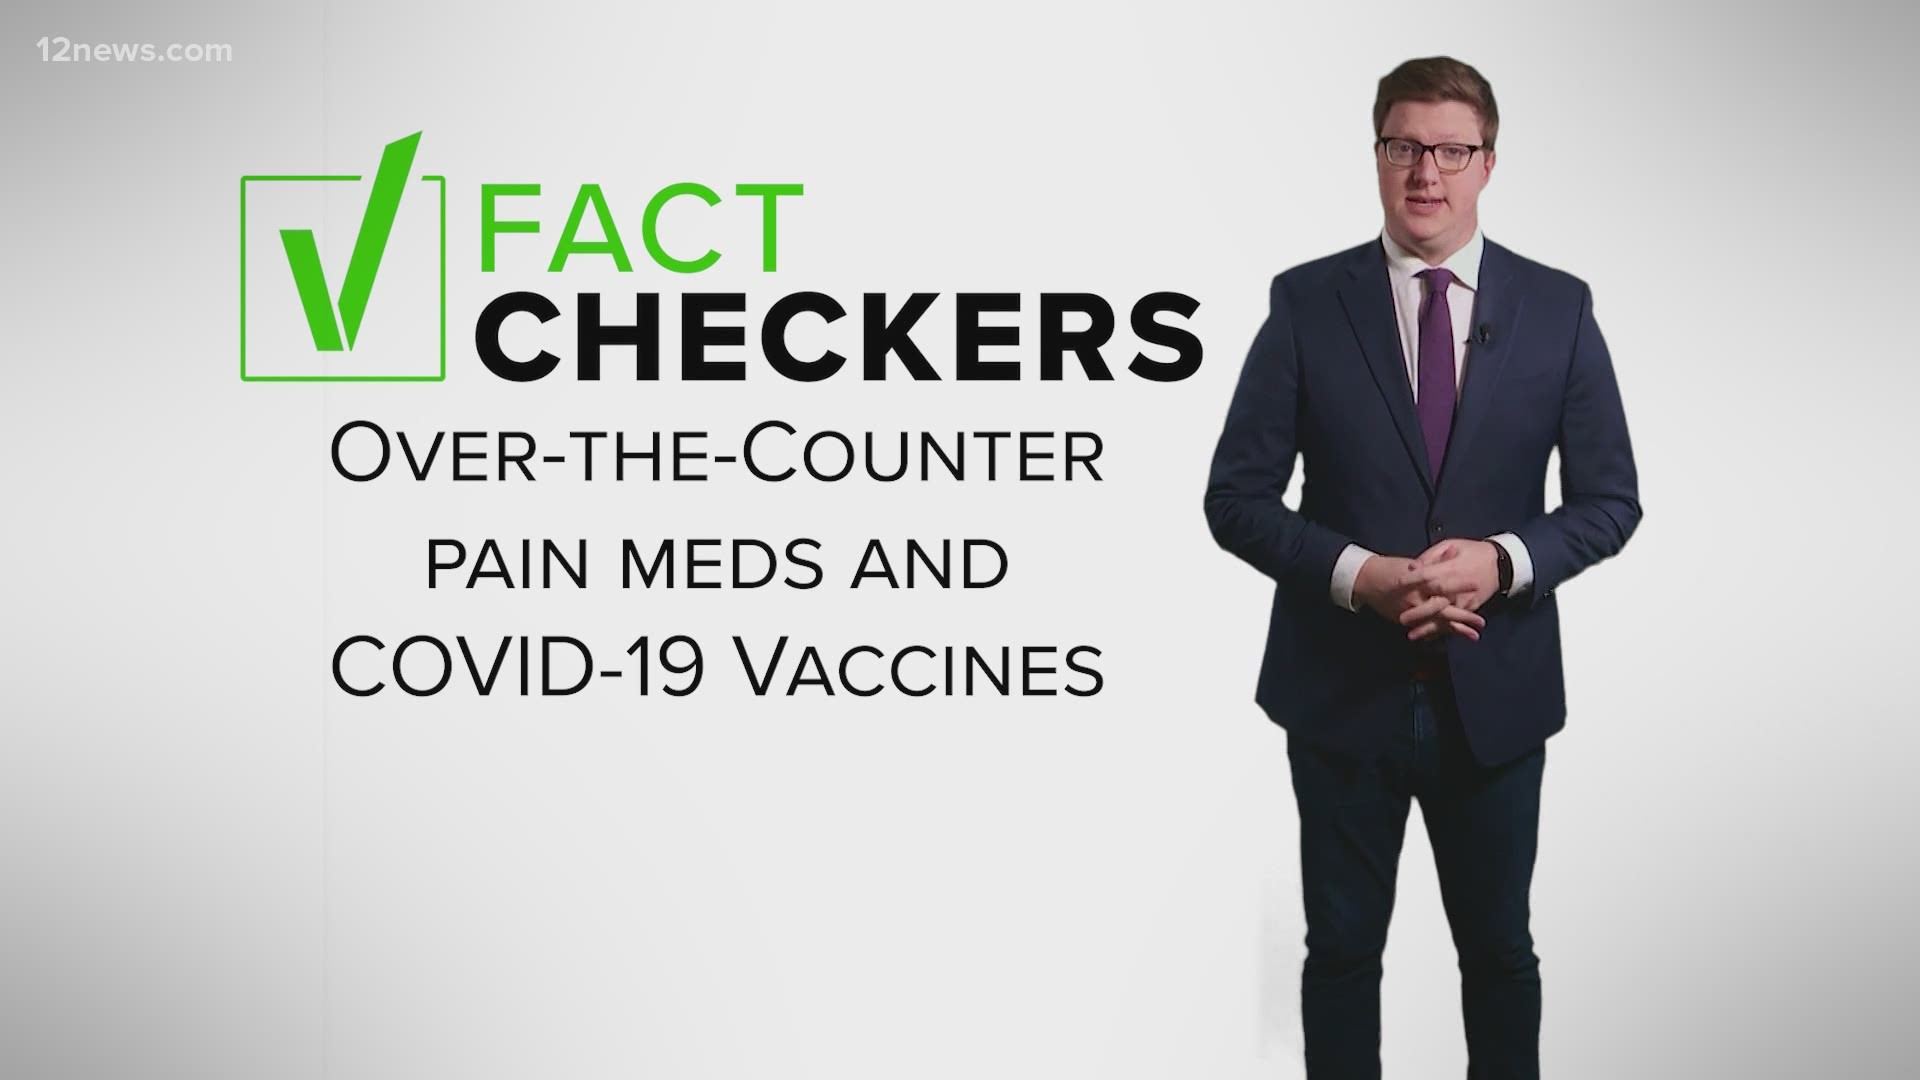 Can you take over the counter medications when you get a COVID vaccine? Rumors about this have been circulating online. The Verify Team looks into it.